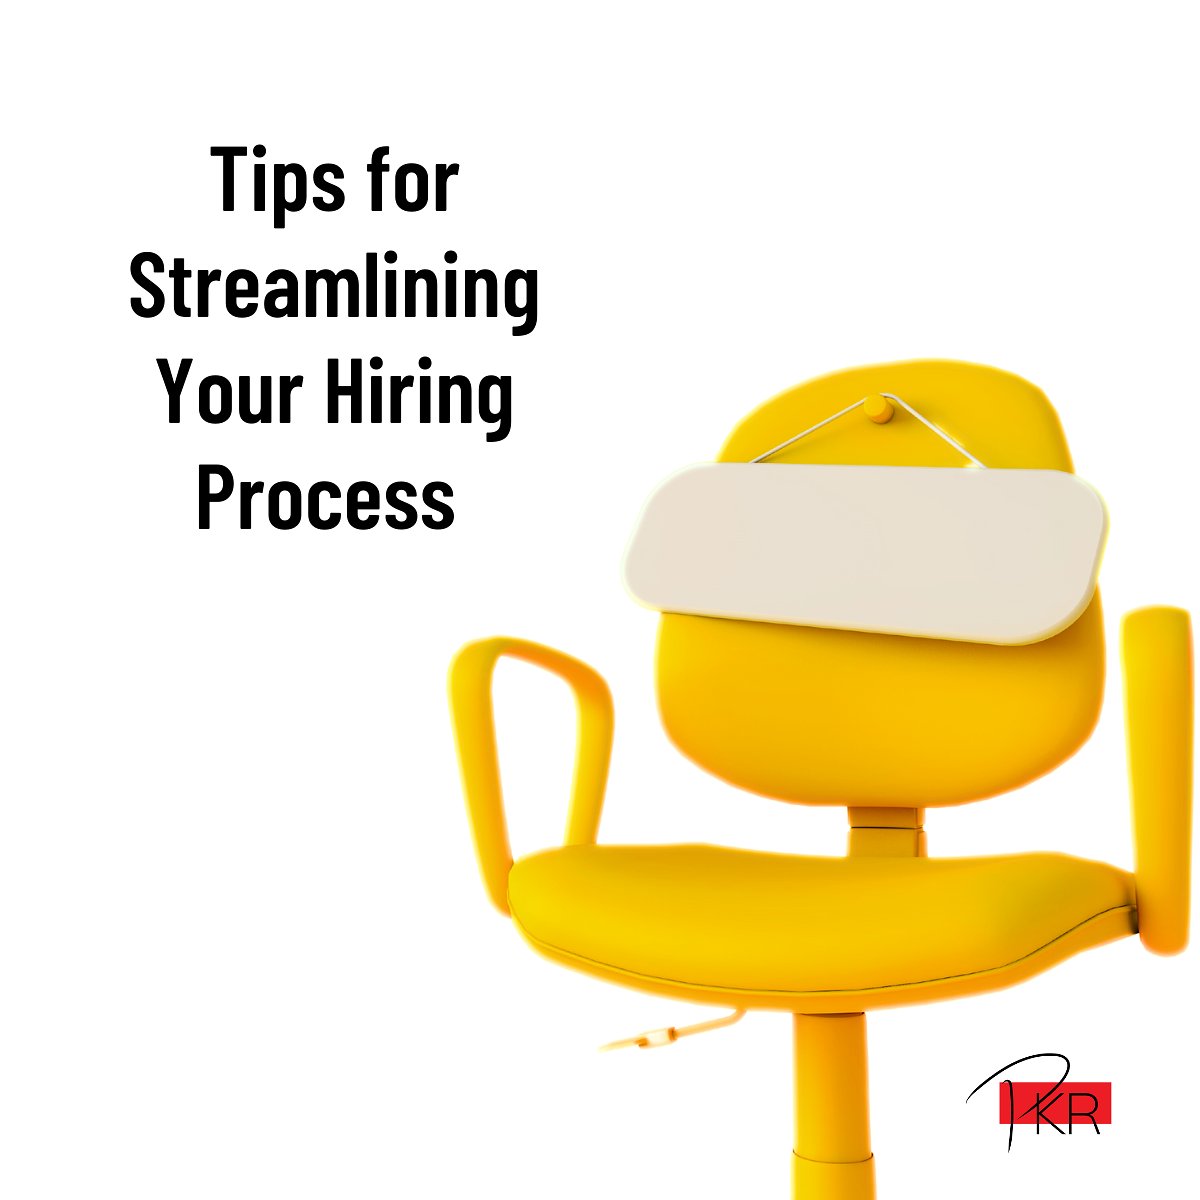 Optimize #hiring process:

1️⃣ Define requirements clearly.
2️⃣ Use targeted job descriptions.
3️⃣ Leverage tech for screening & tracking.
4️⃣ Conduct structured interviews.
5️⃣ Provide prompt feedback.

Streamline and save resources. Partner with us.

#talentacquisition #HiringTips